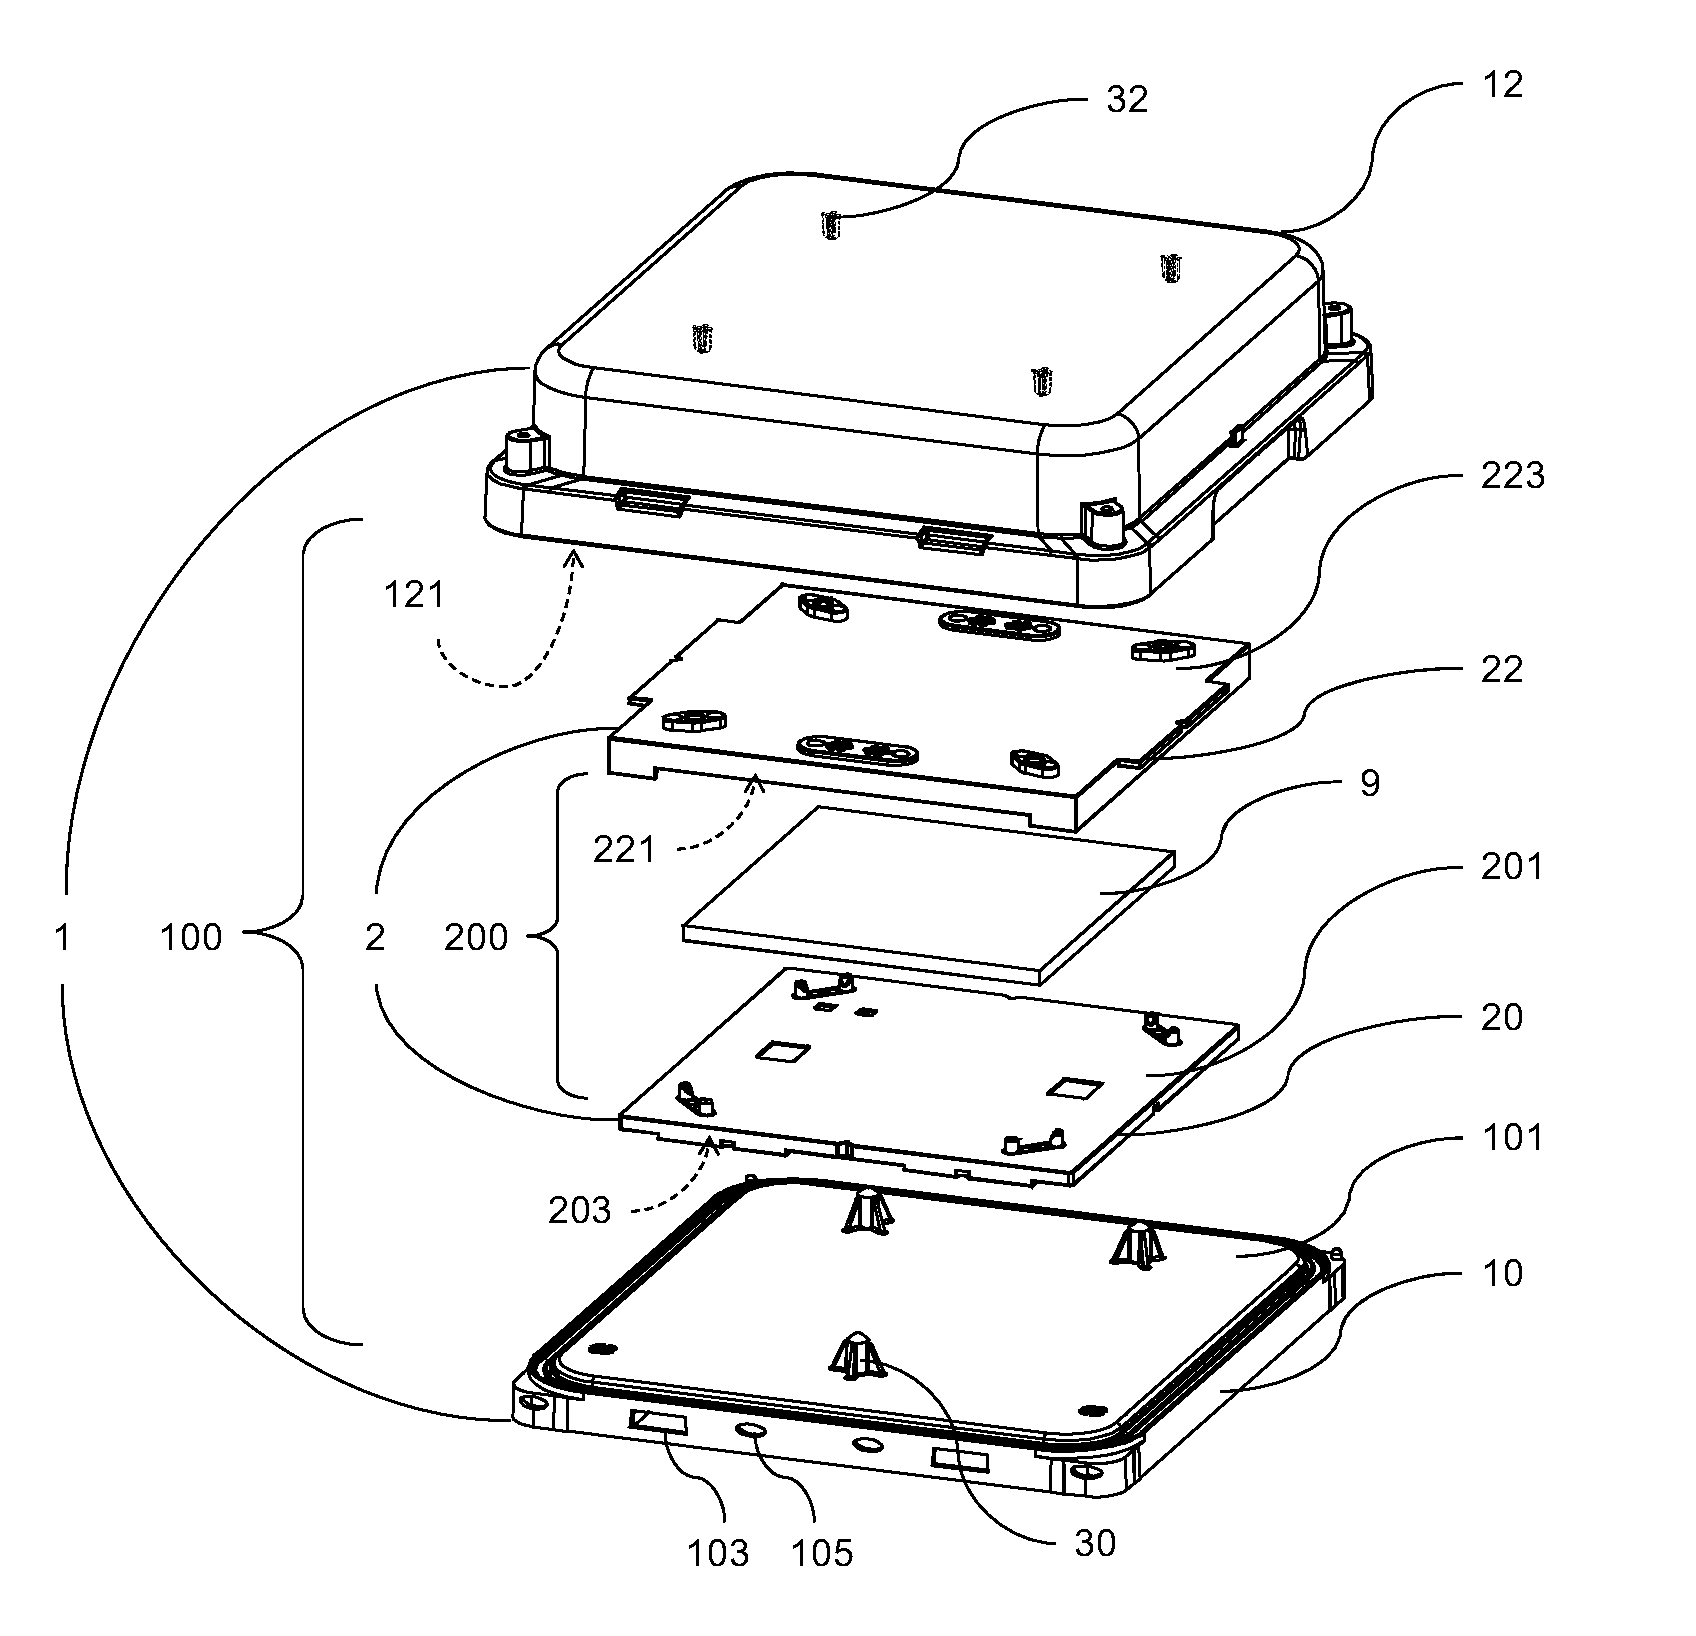 EUV pod with fastening structure